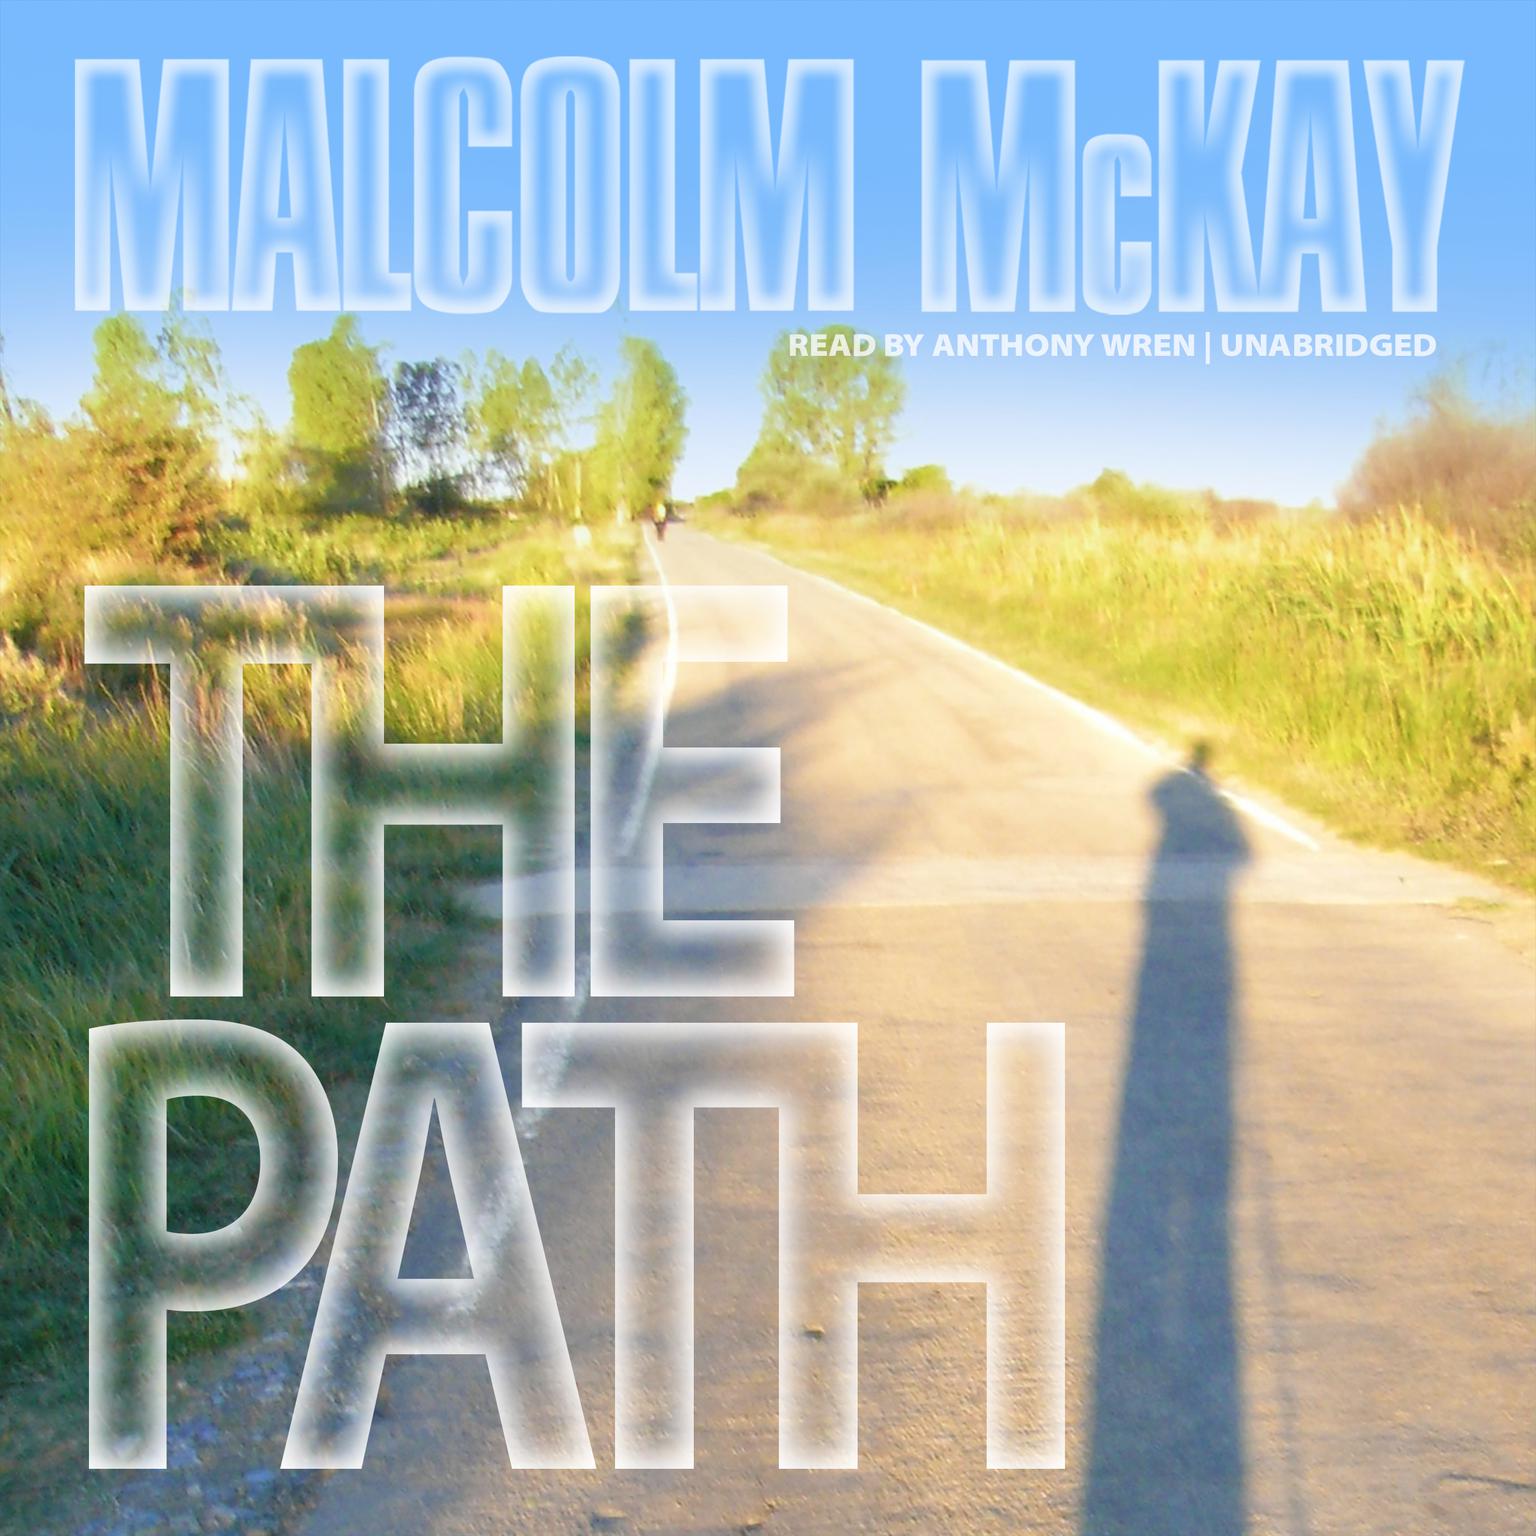 The Path Audiobook, by Malcolm McKay